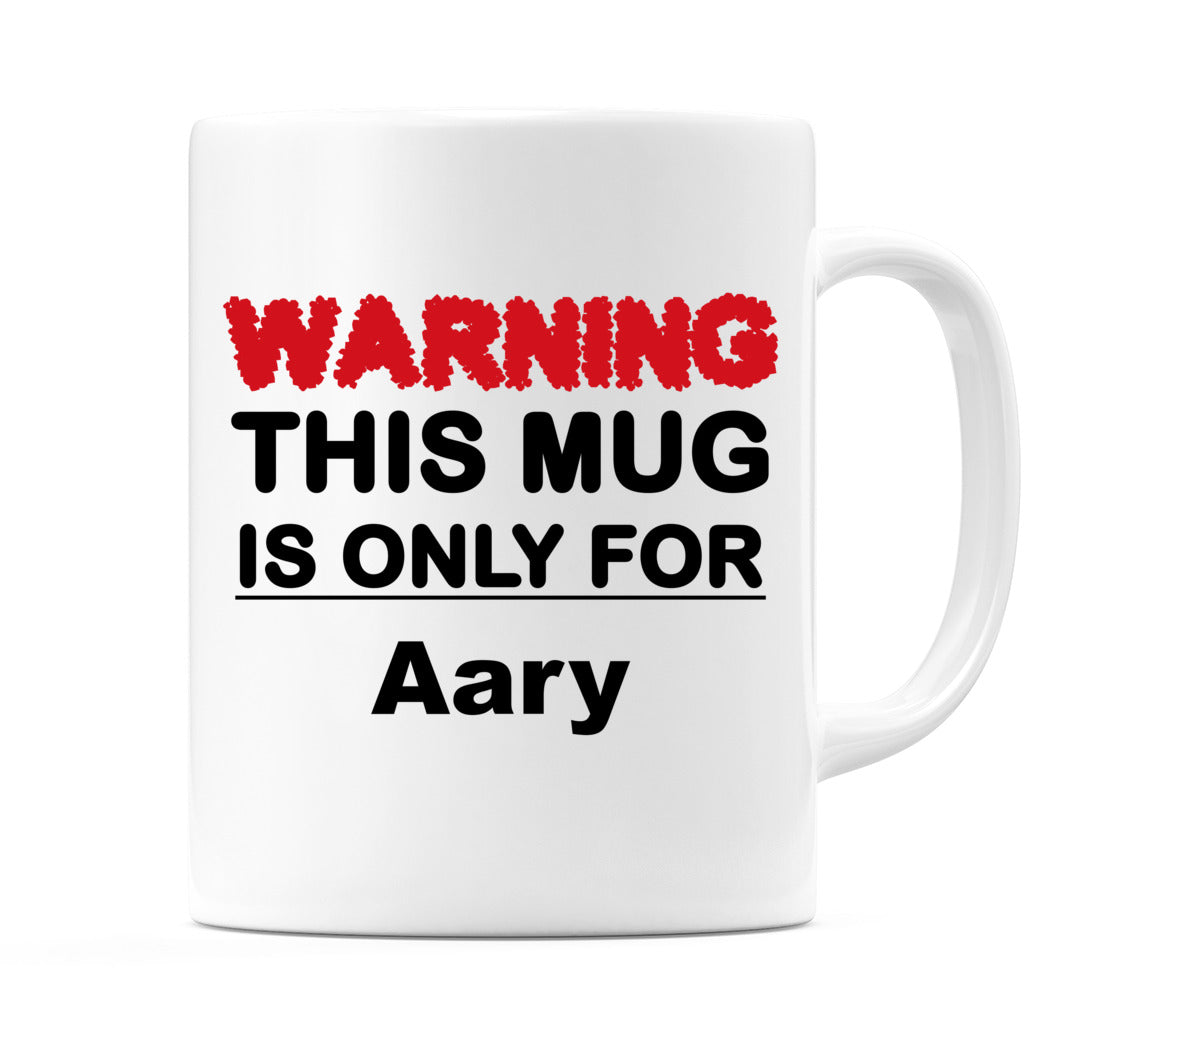 Warning This Mug is ONLY for Aary Mug